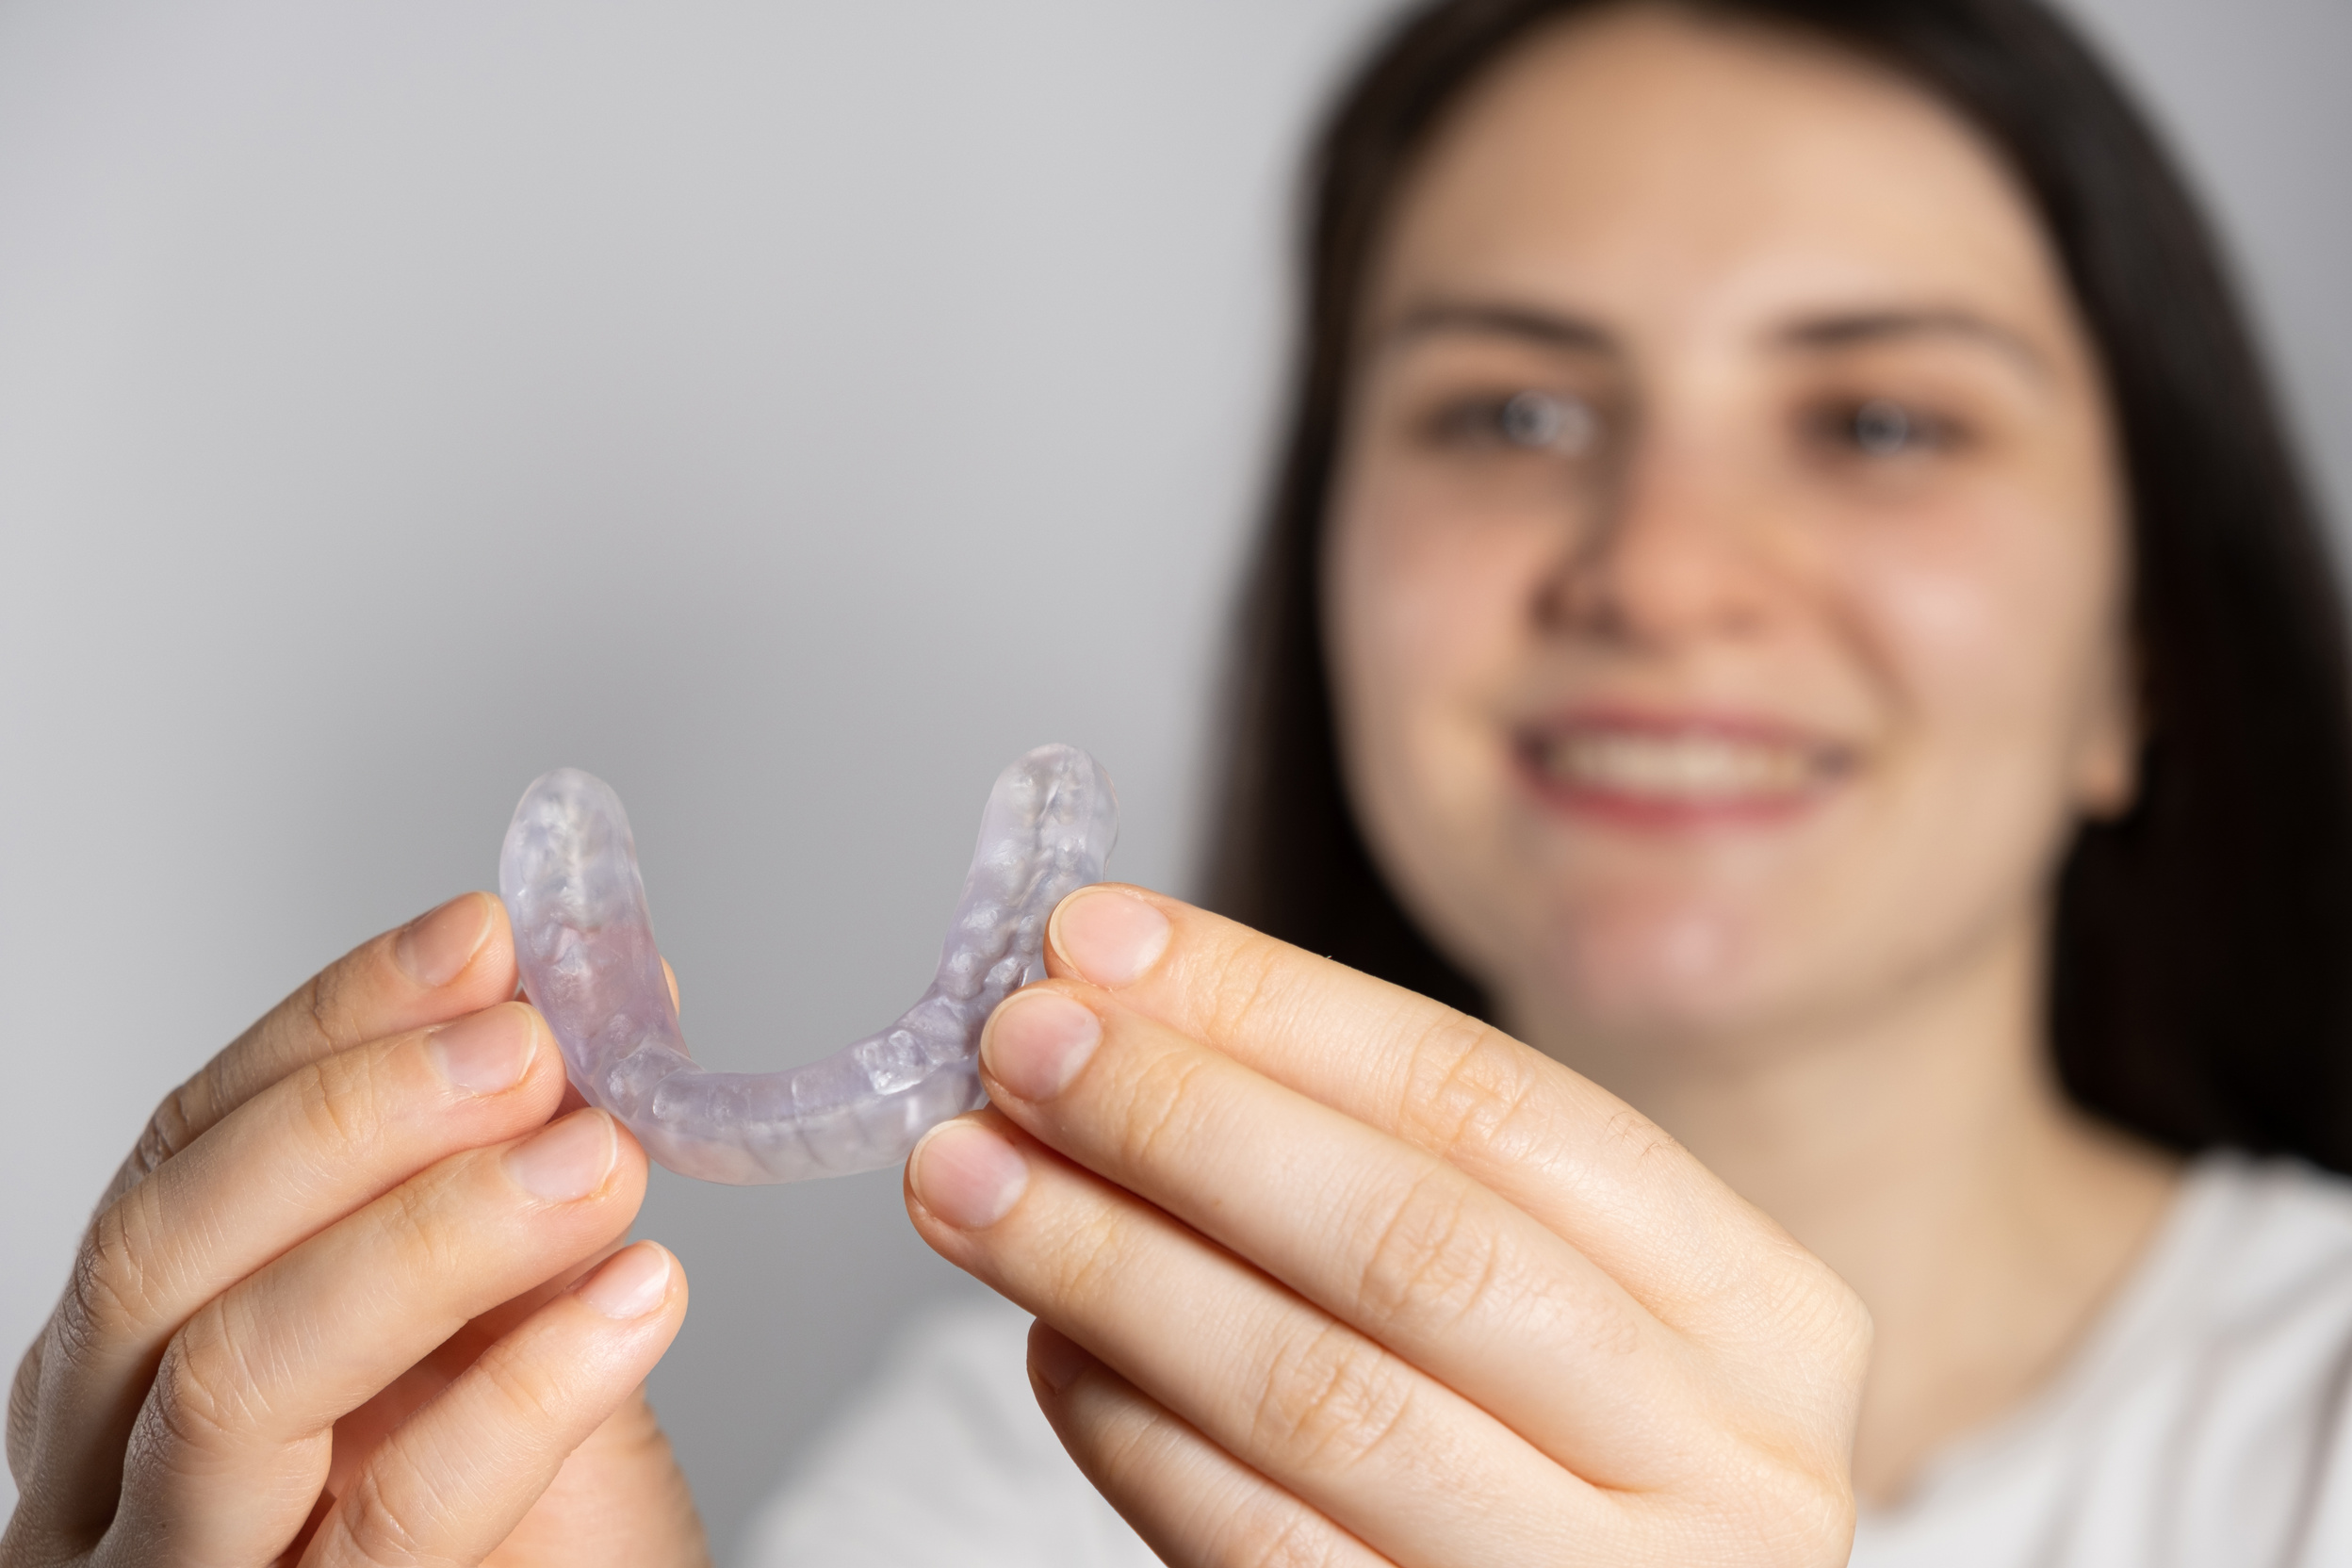 A woman holds dental mouthguard, splint for the treatment of dysfunction of the temporomandibular joints, bruxism, malocclusion, to relax the muscles of the jaw.